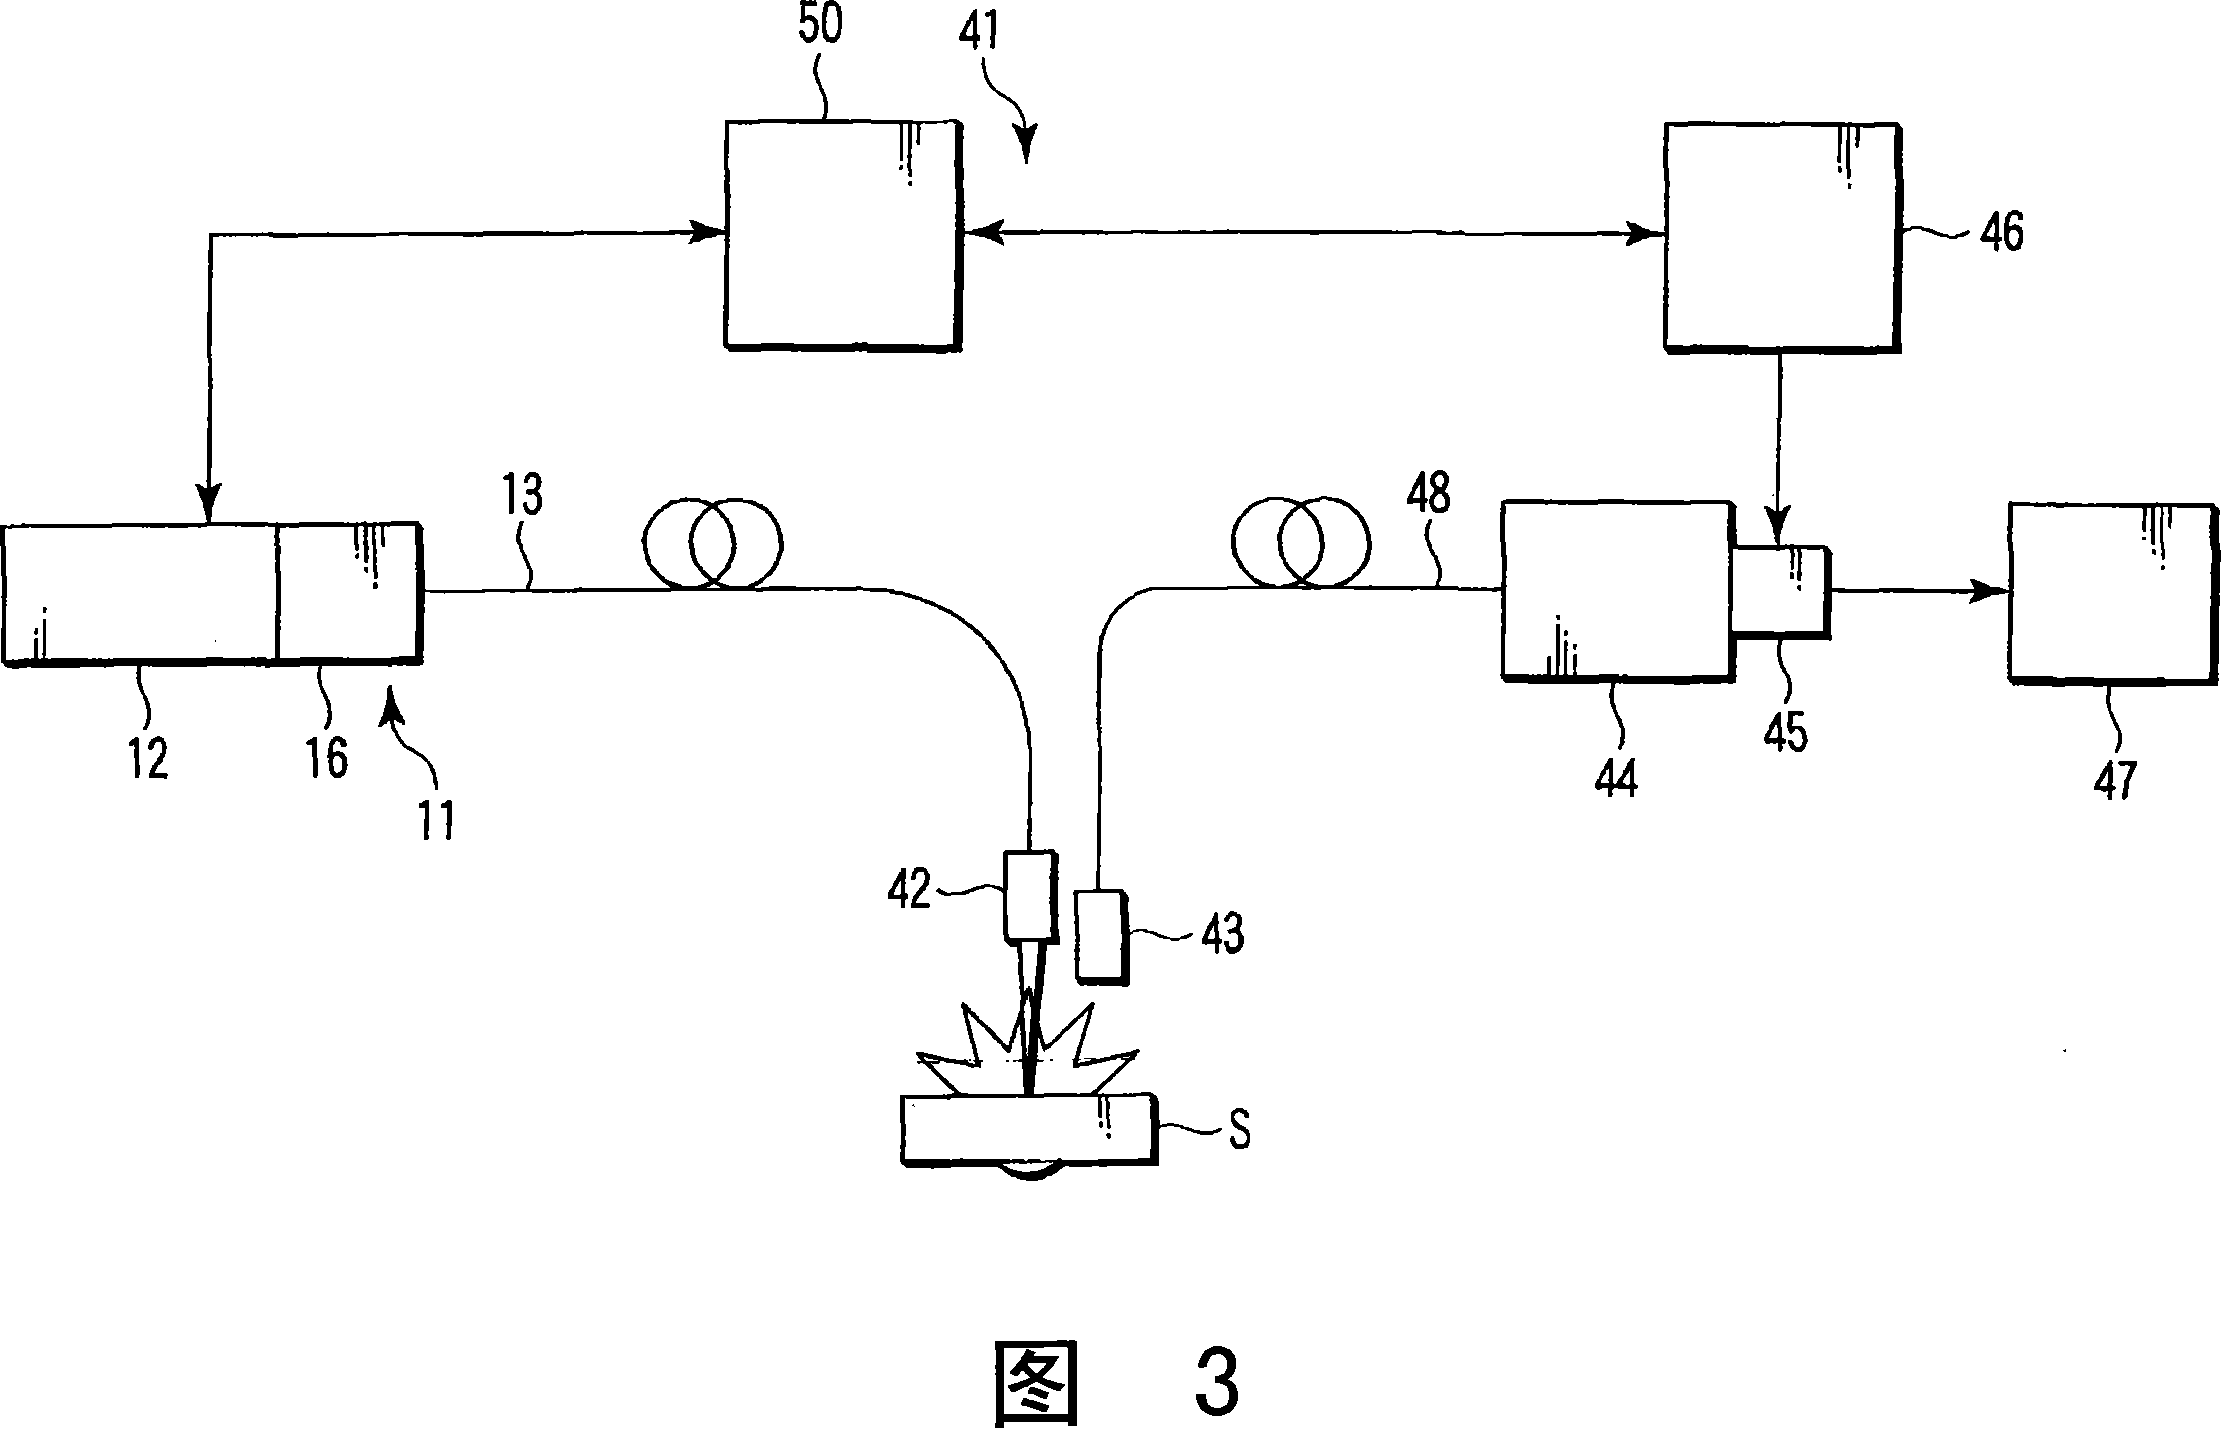 Laser beam injecting optical device for optical fiber